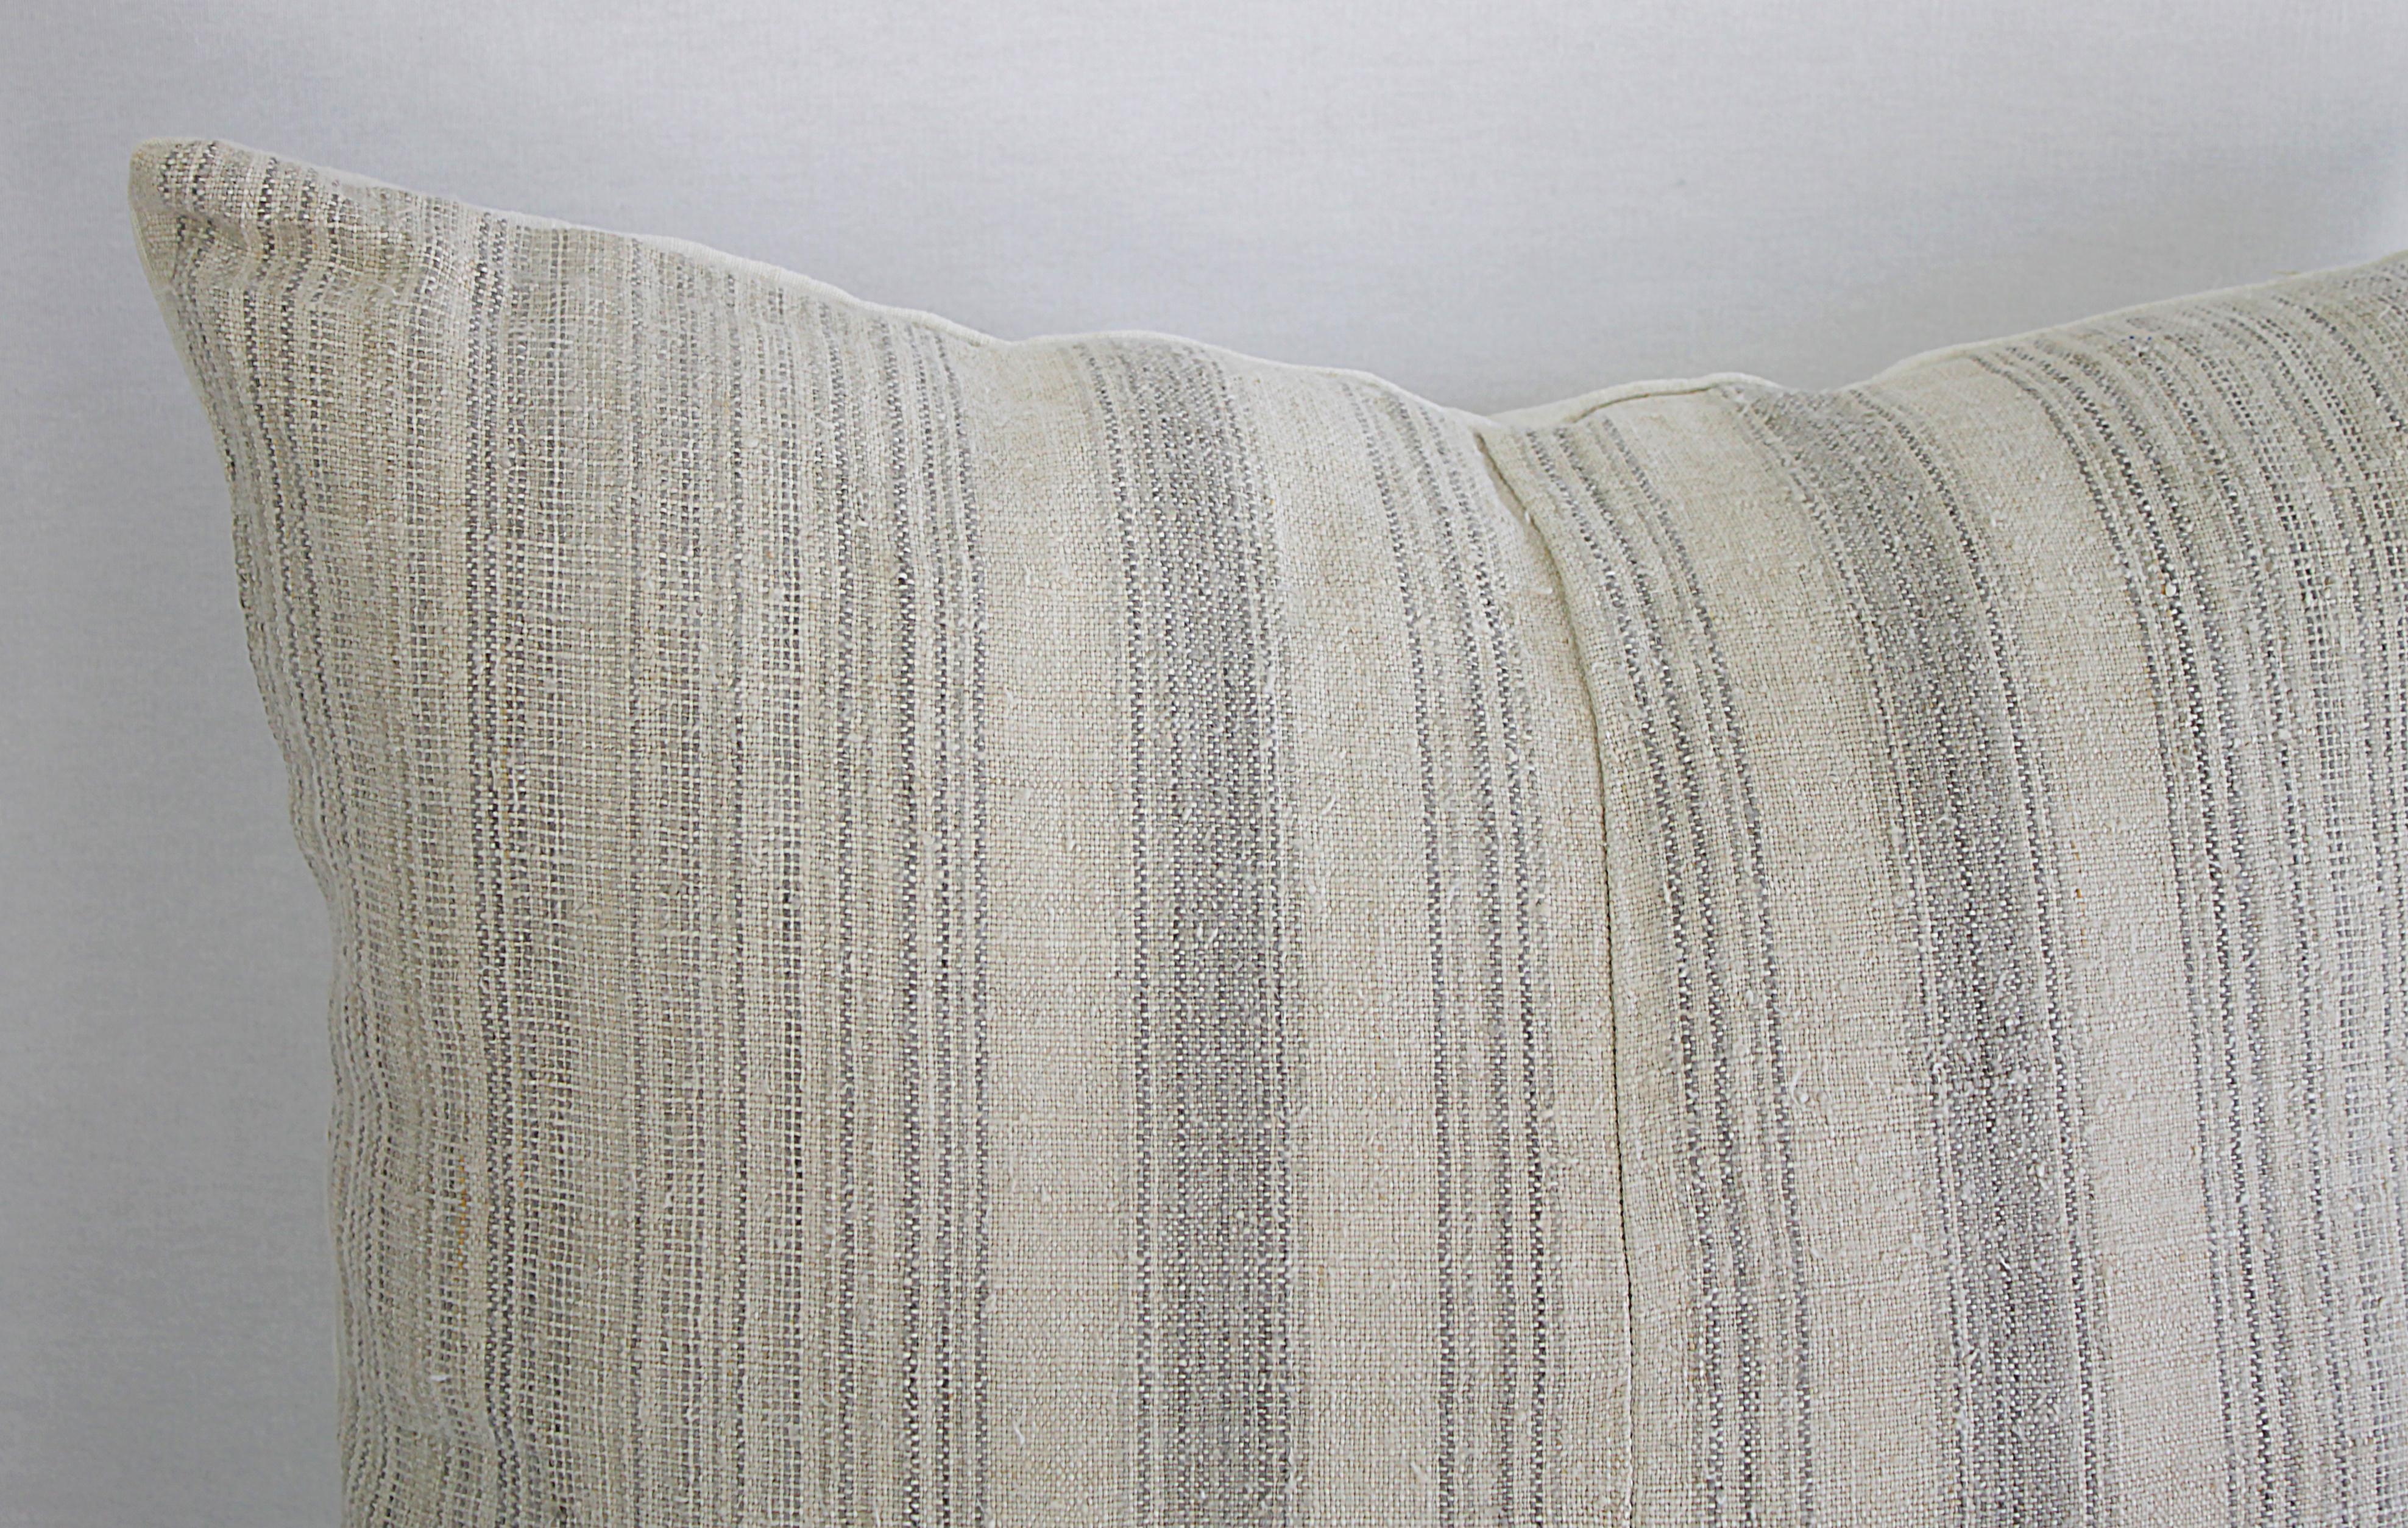 Antique homespun linen and striped grain sack pillow.
Light grey and creamy white striped grain sack front, the backside is finished in a off white natural French linen. The front of the pillows are made from 19th century homespun linen, and the